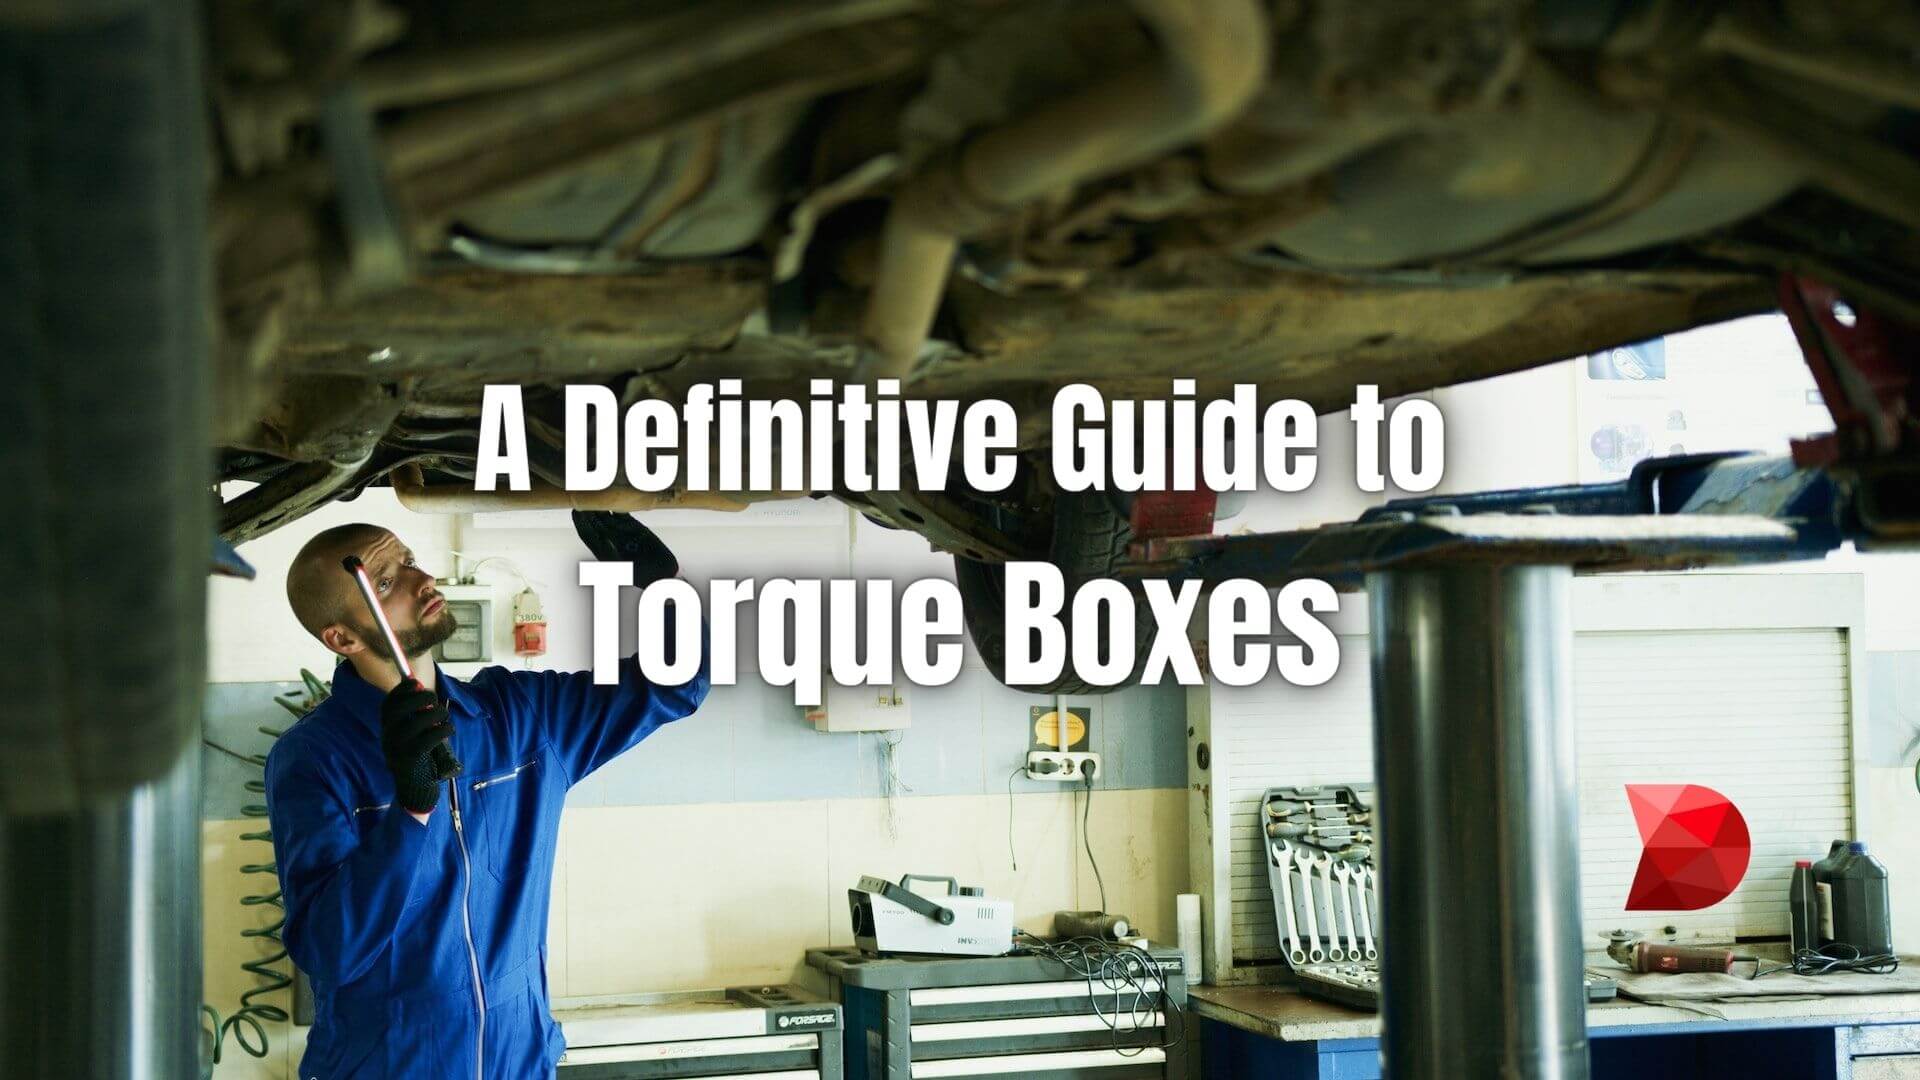 A torque box is often employed in high-performance or racing applications to strengthen and reinforce the body of a vehicle. Learn more!